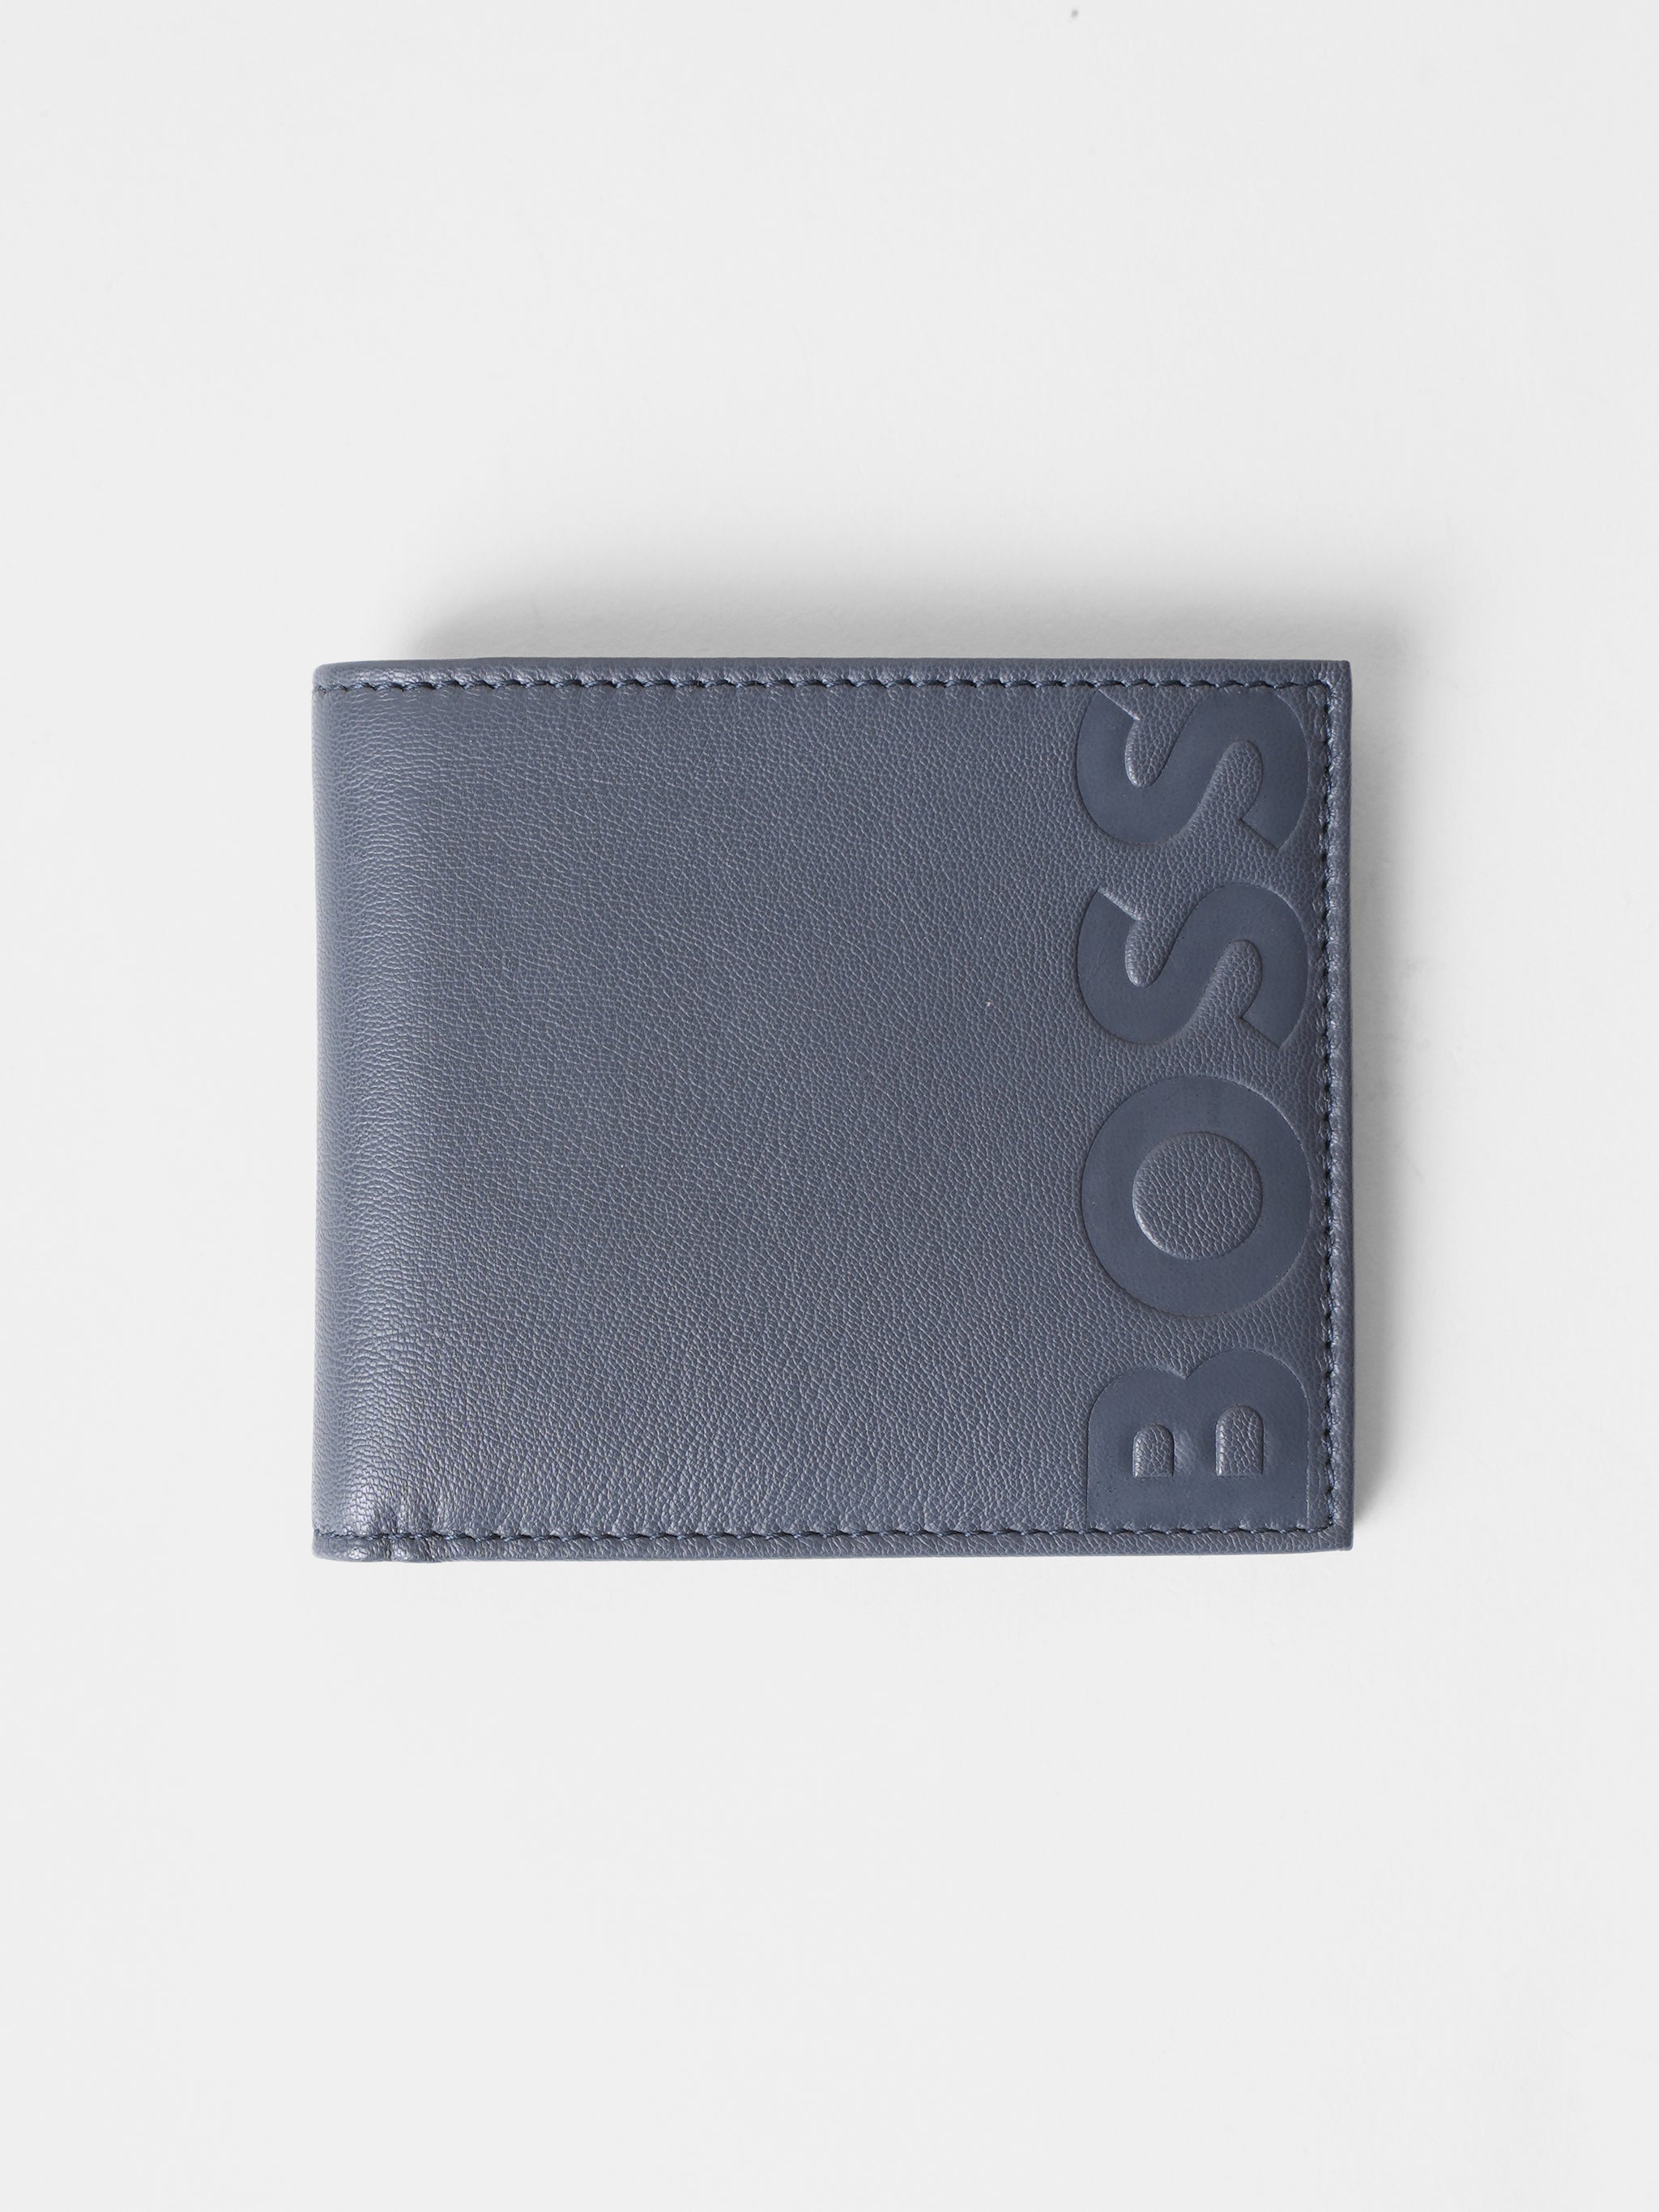 New Hugo Boss Embosed Logo Wallet In Grained Leather With Coin Pocket